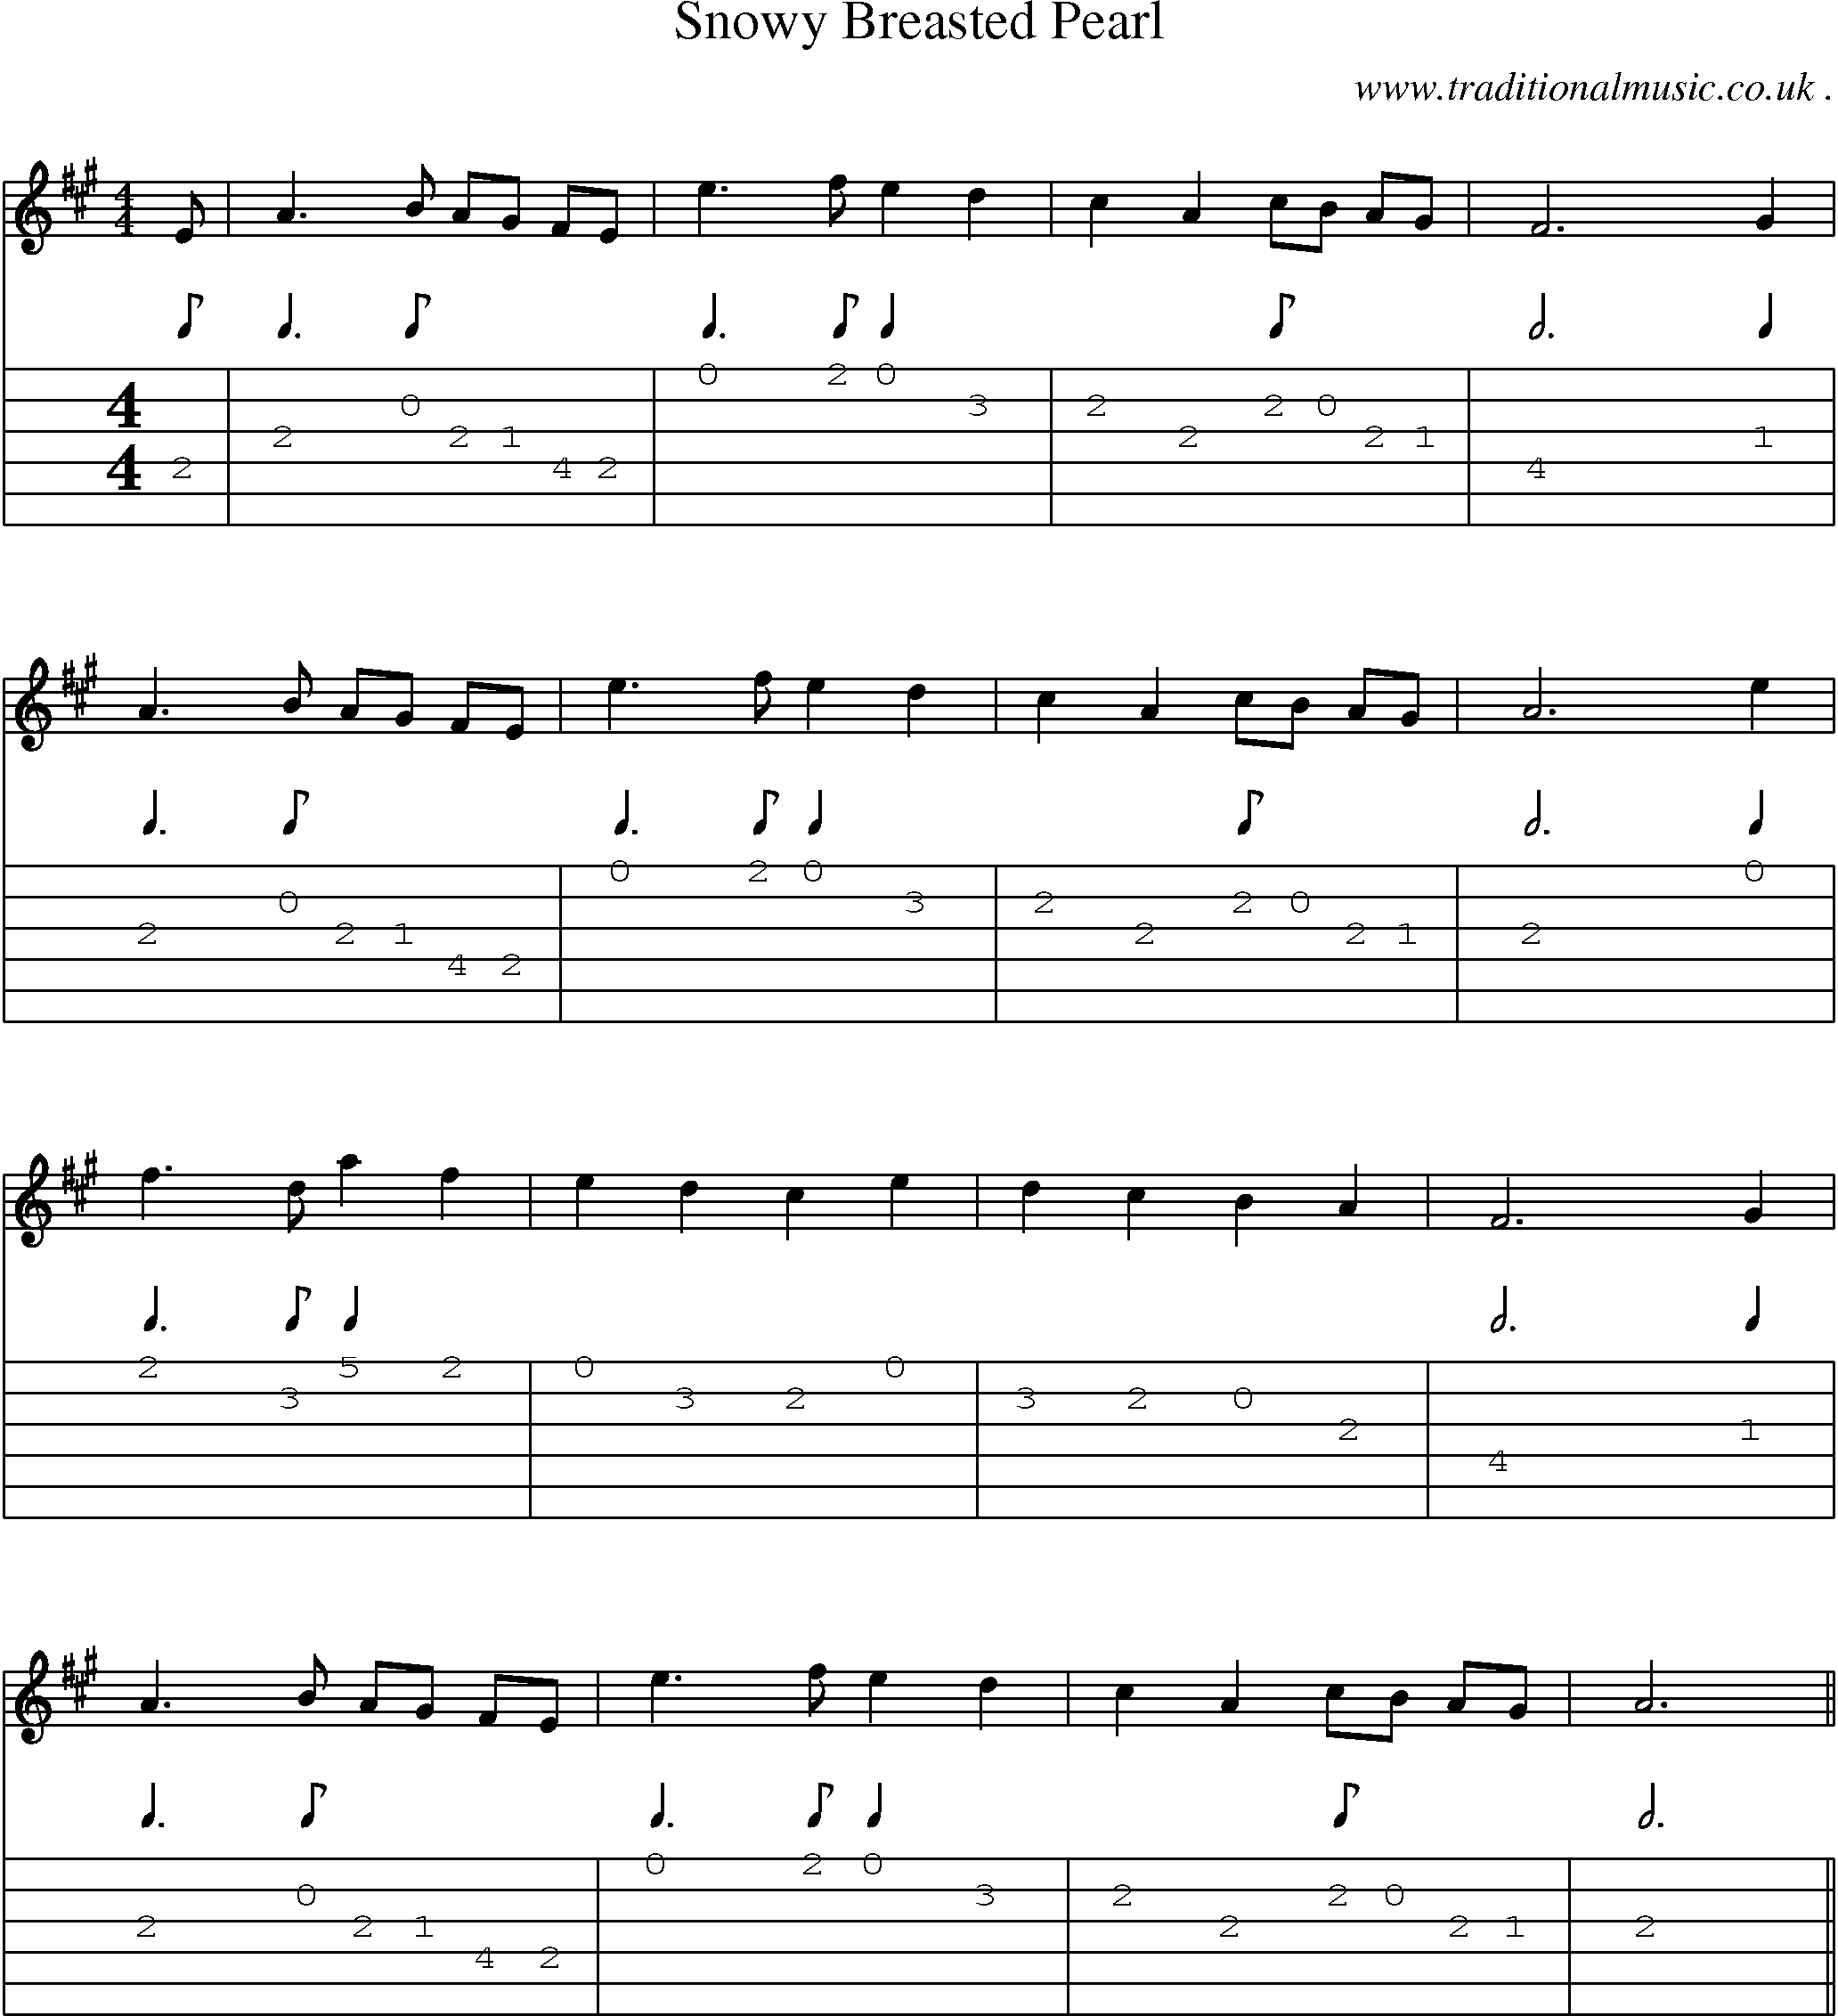 Sheet-Music and Guitar Tabs for Snowy Breasted Pearl